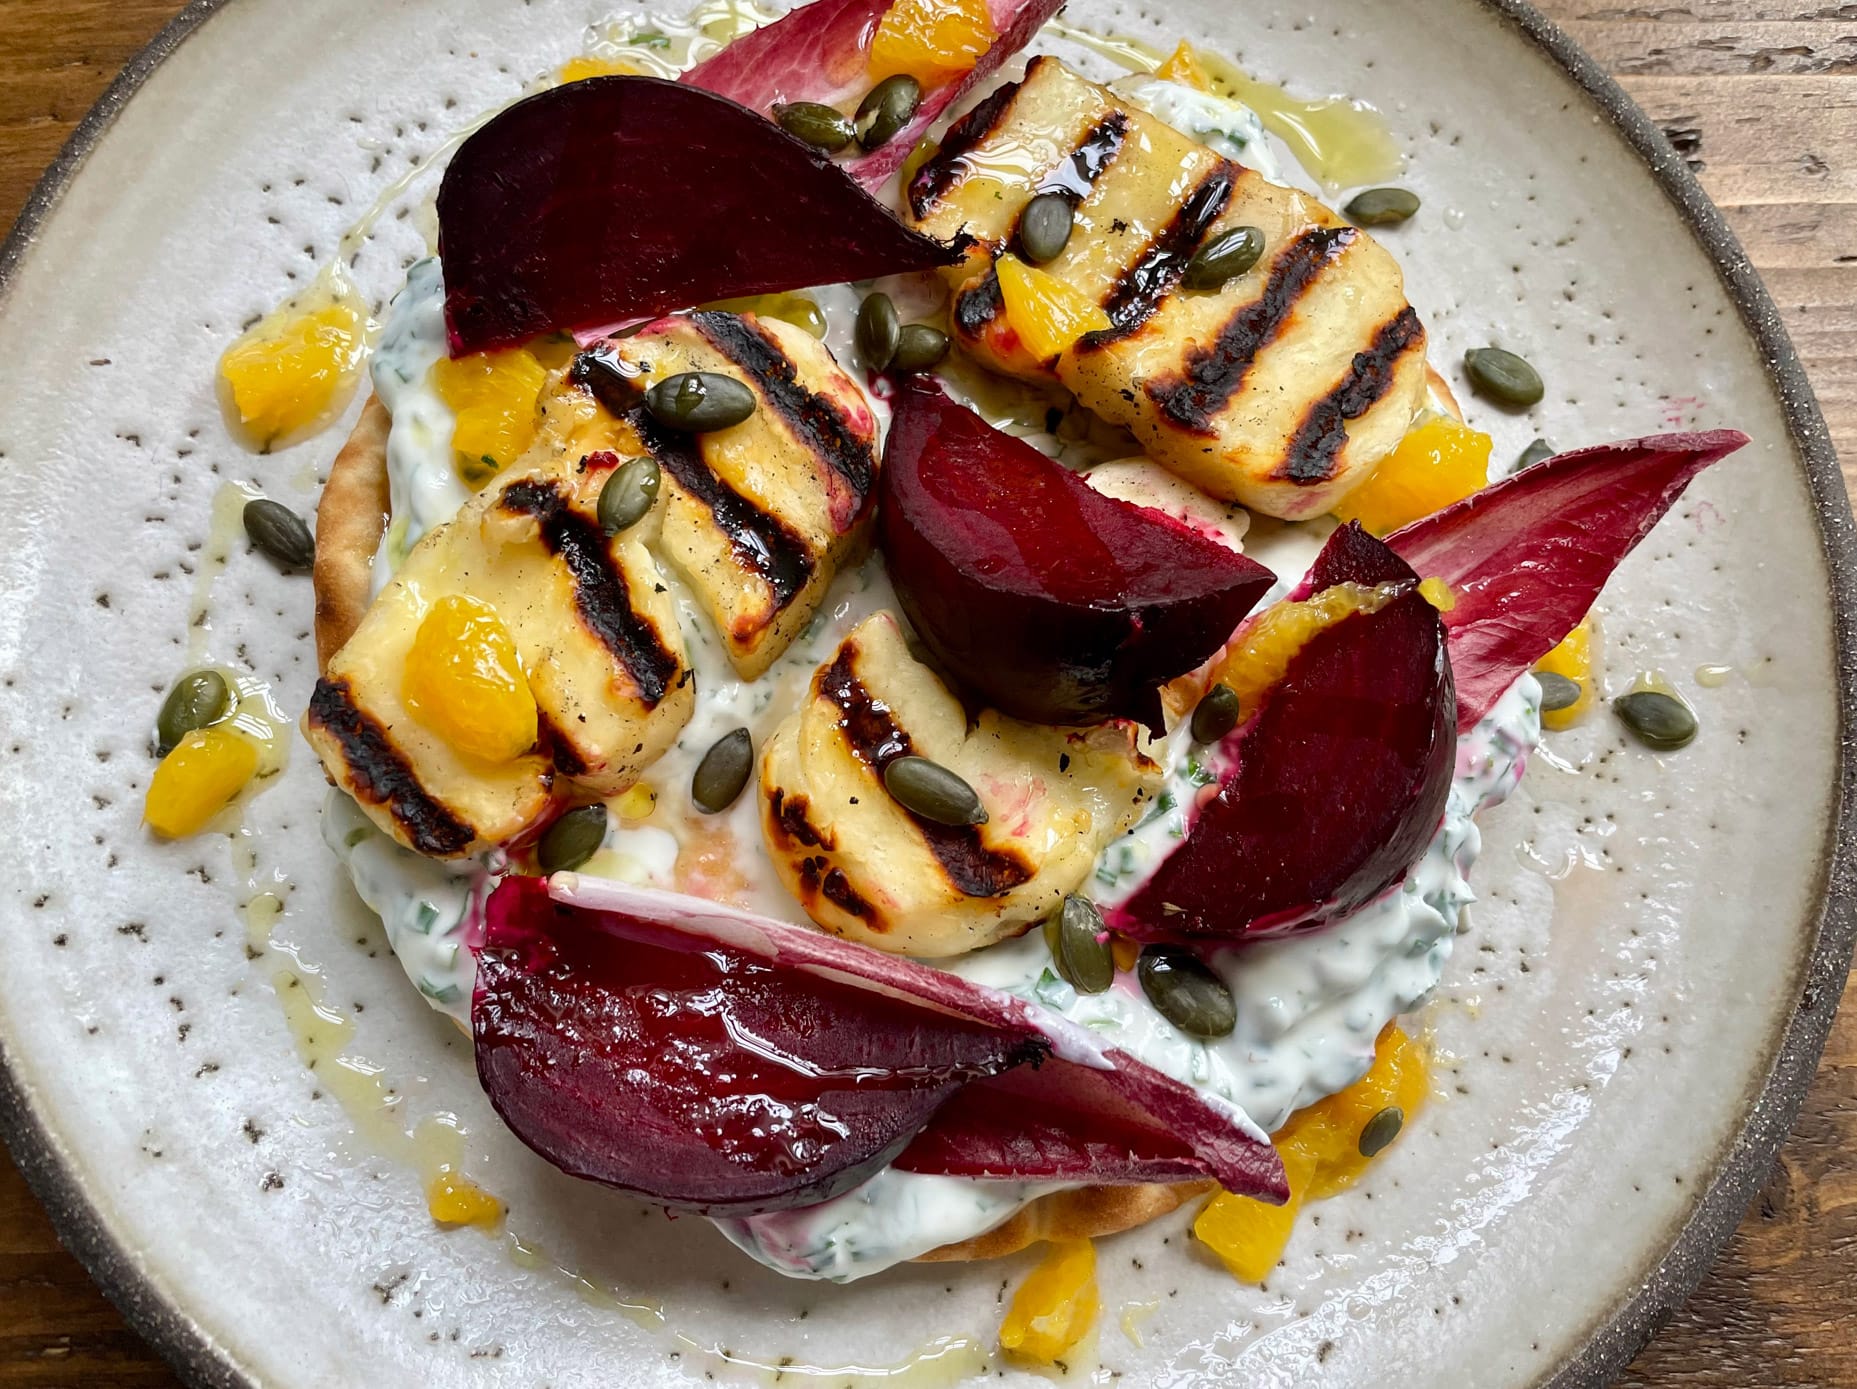 BBQ Beetroot and Halloumi Flatbreads with Herby Yoghurt and Toasted Seeds